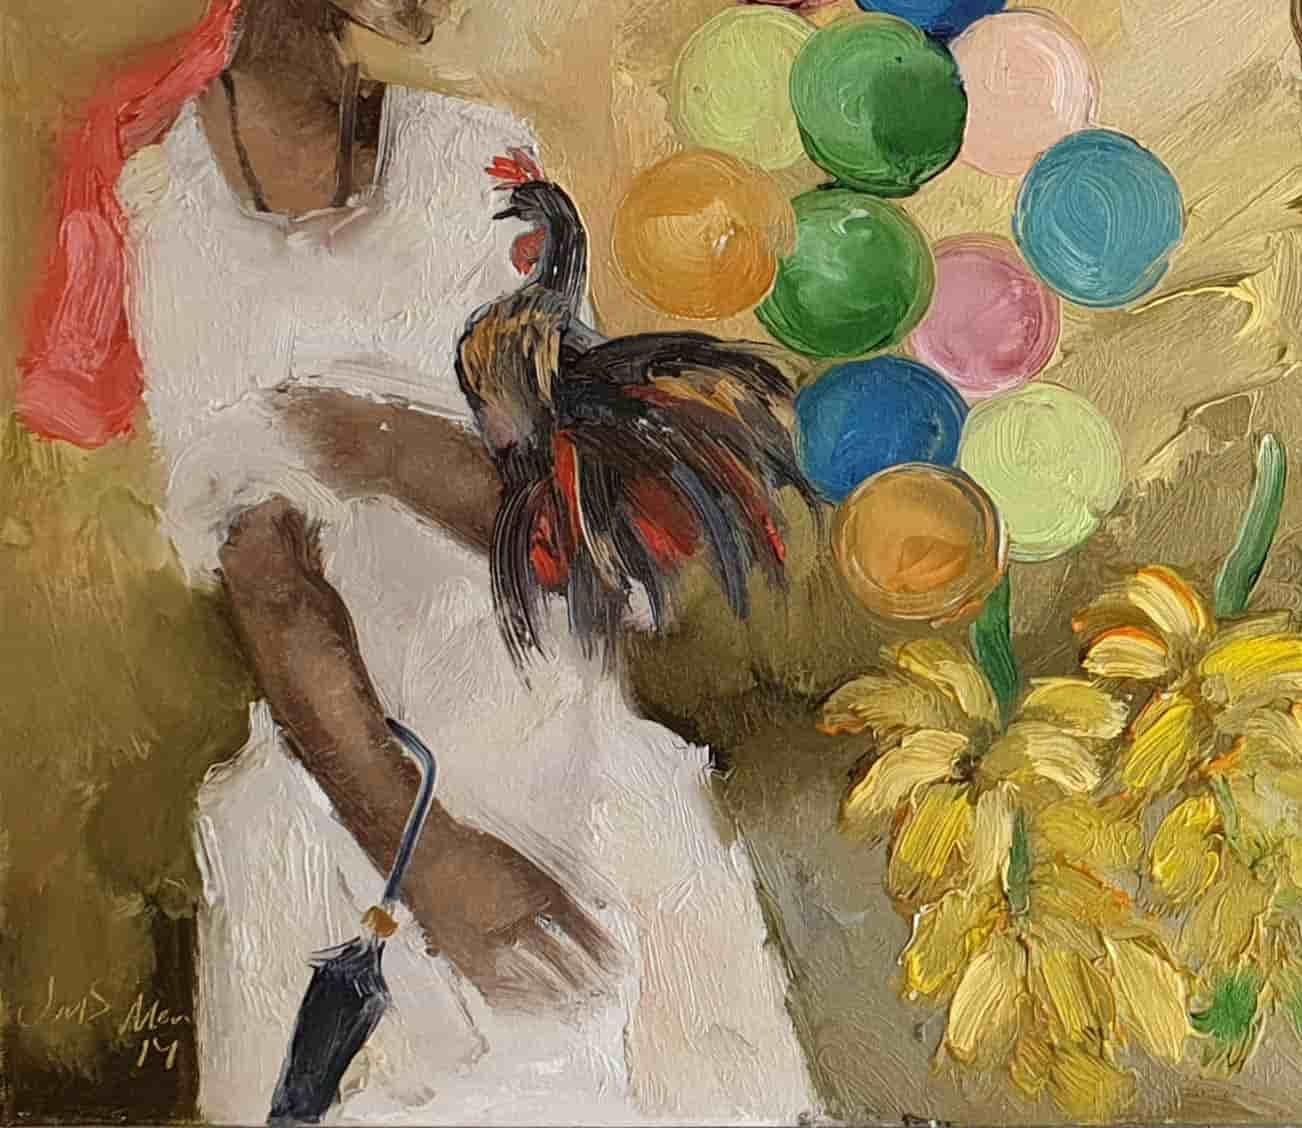 Man Selling Balloons and Woman Flowers, Oil on Canvas Brown Green 